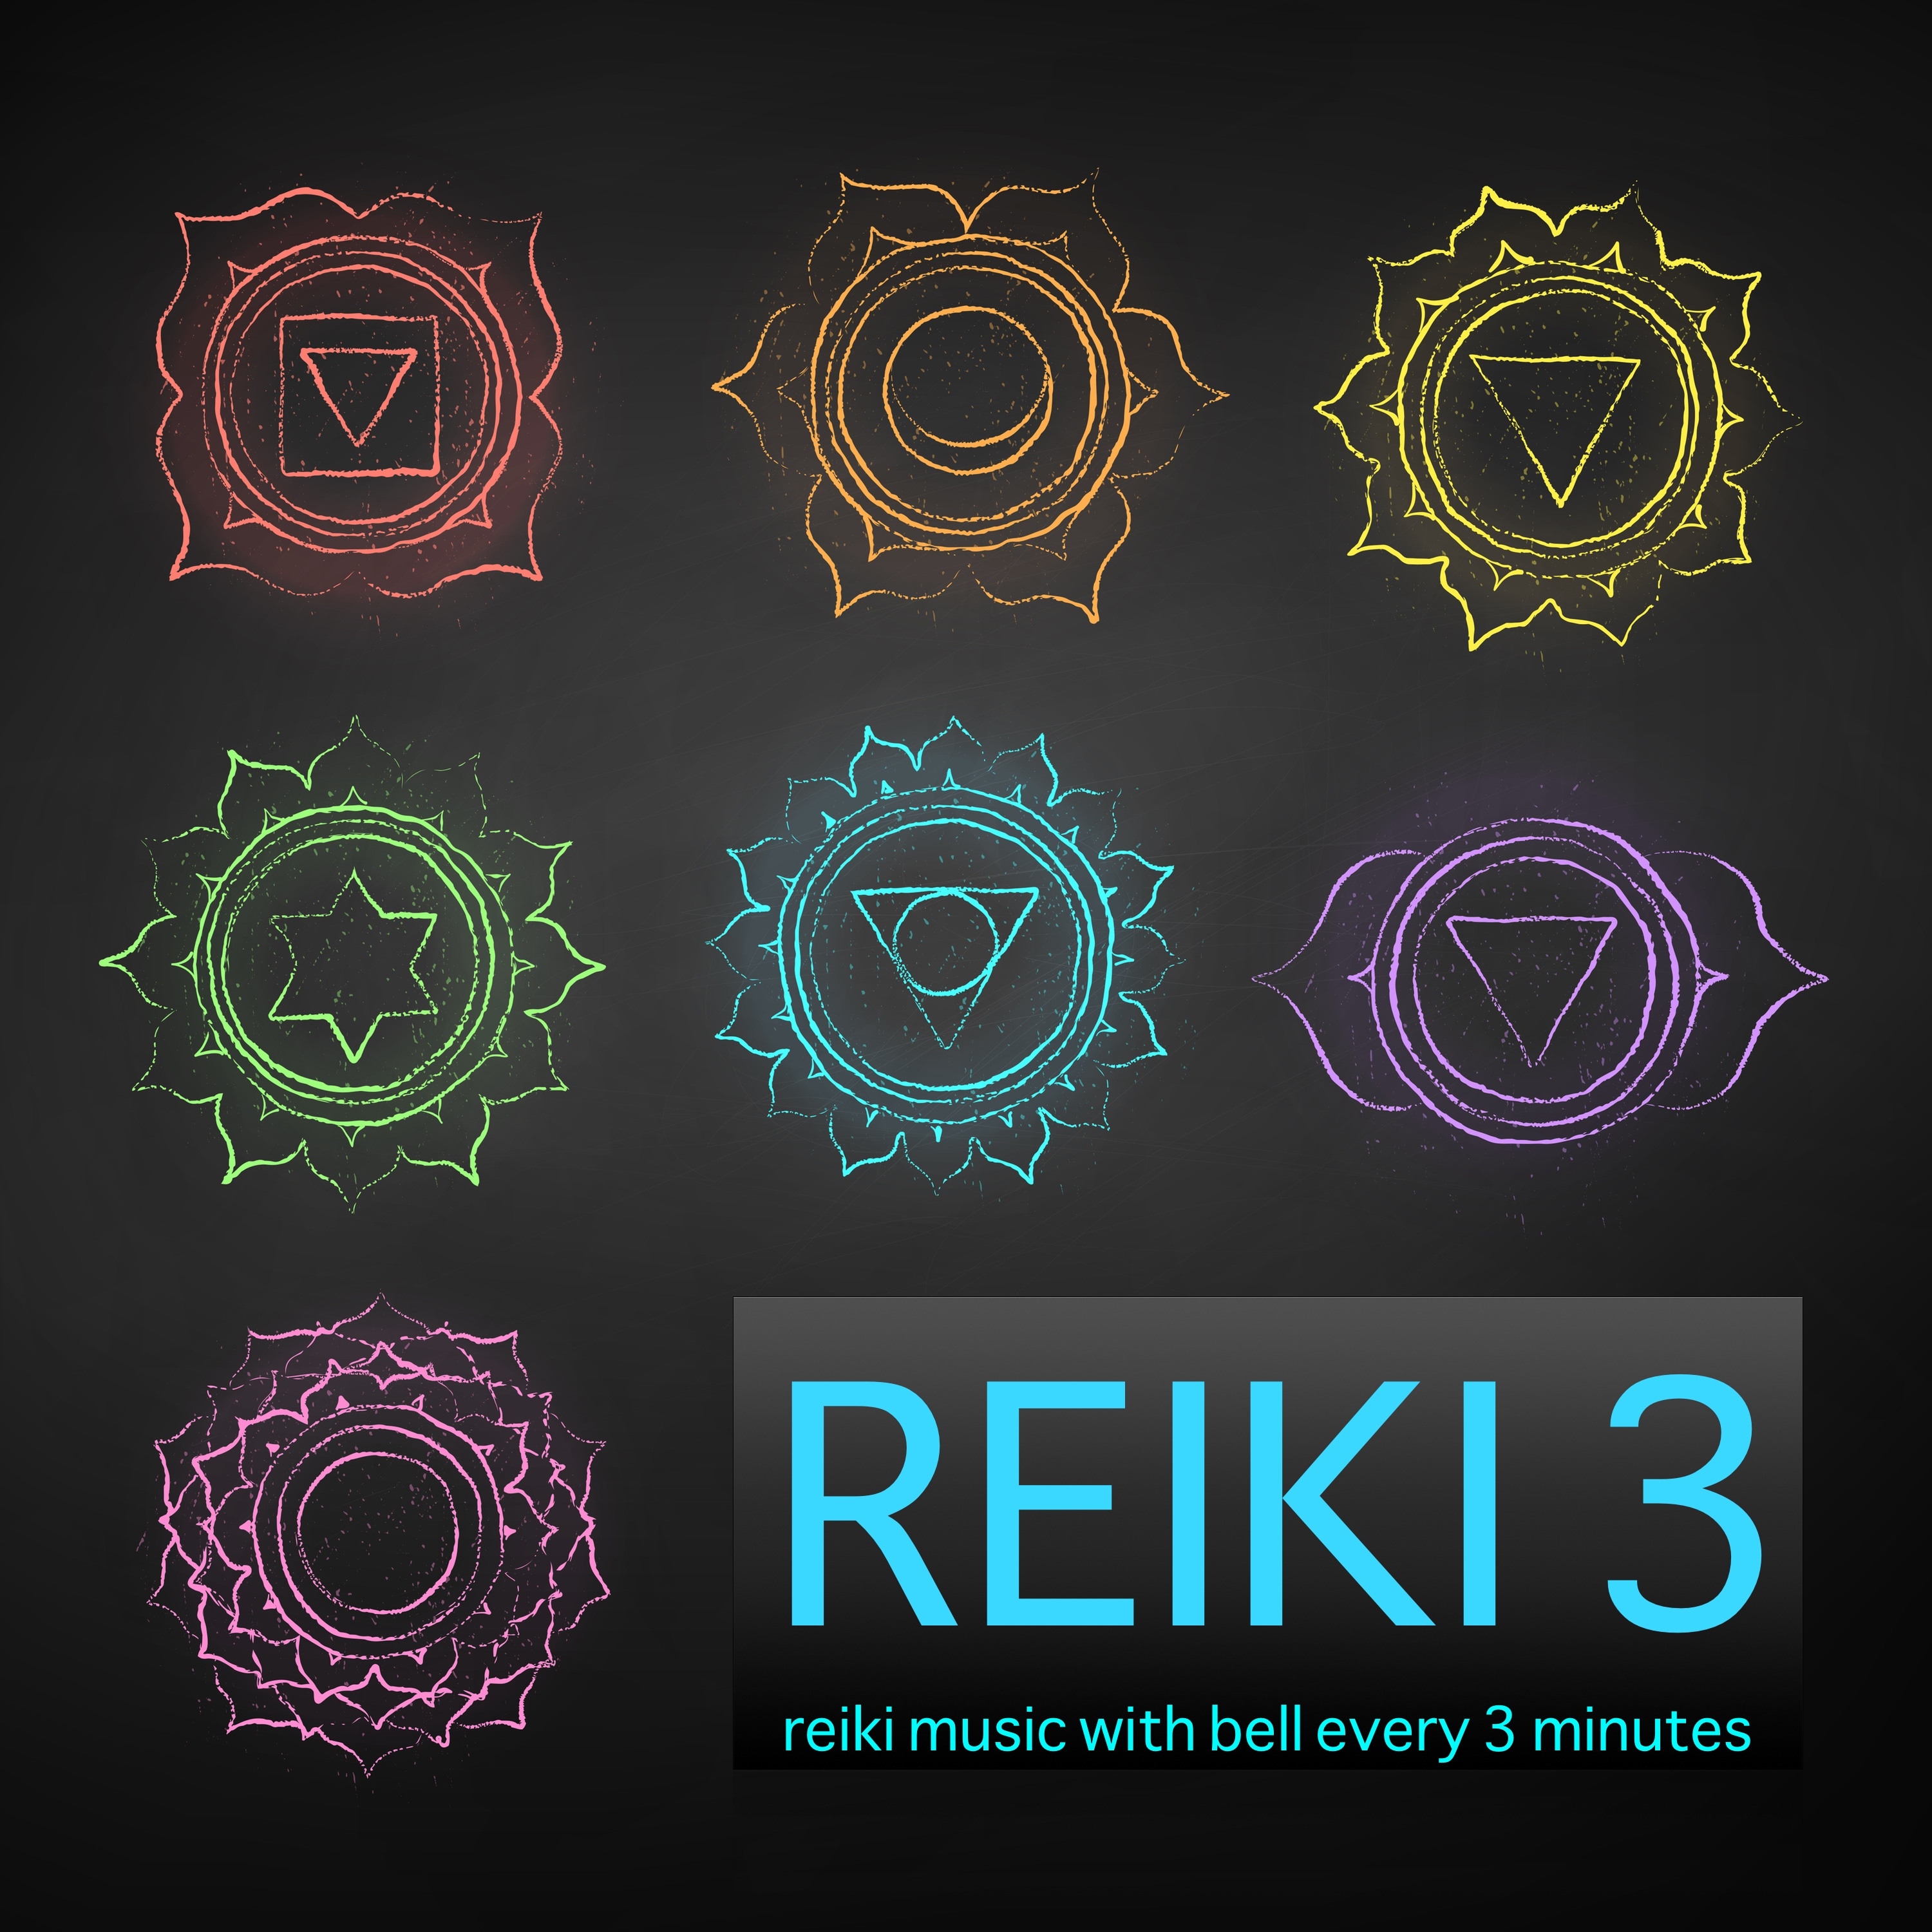 Reiki Level 3 - Deep Reiki Music for Therapy with Bell Every 3 Minutes